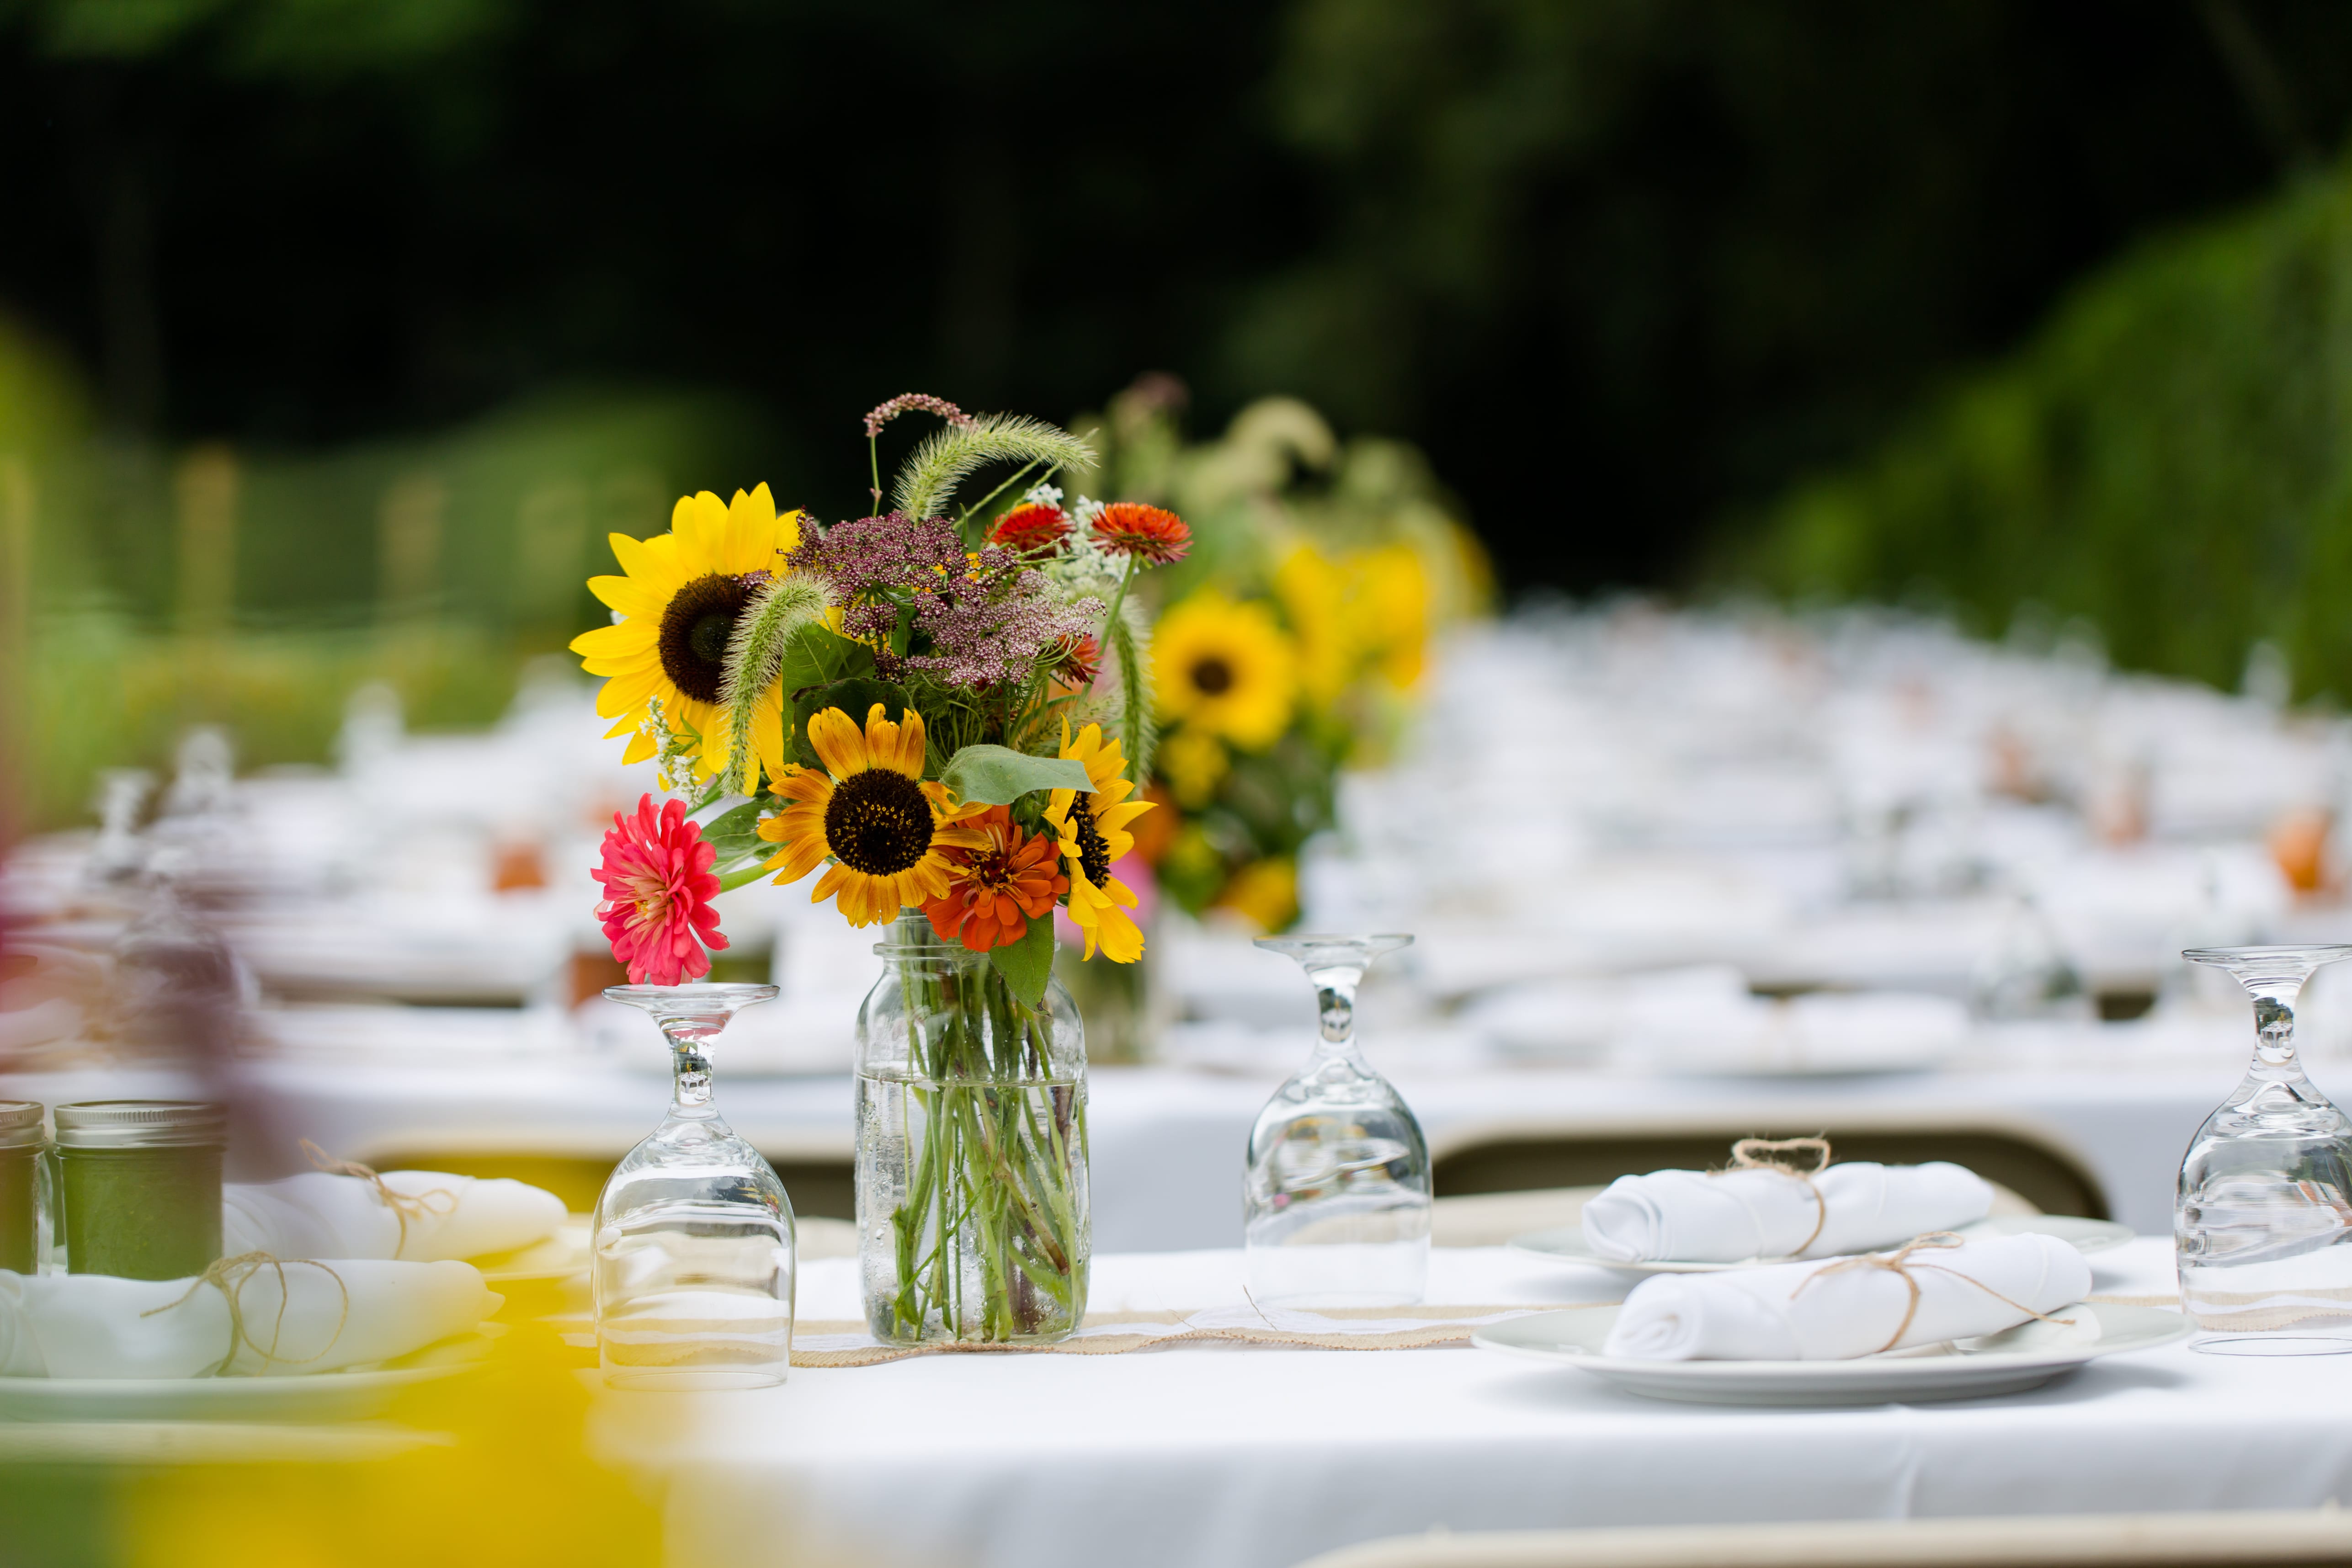 Fundraiser Dinner at Massaro Farms in Woodbridge CT with Photography by Walker Studios LLC